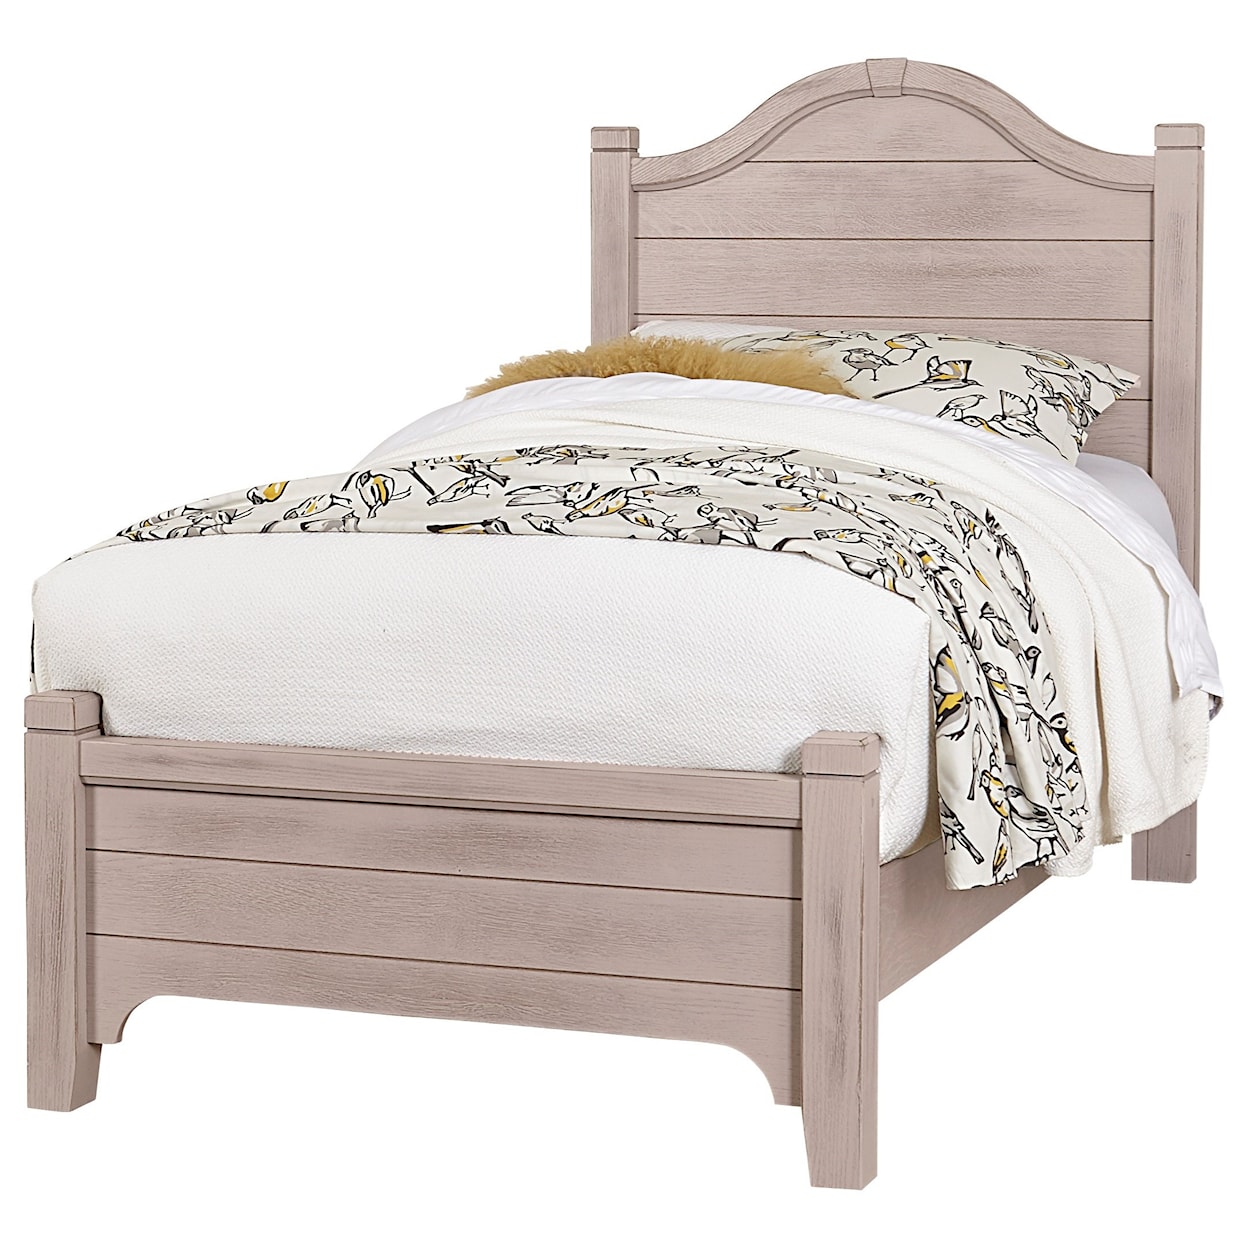 Laurel Mercantile Co Bungalow 741 338 833 900 Twin Low Profile Bed With Arch Headboard Dunk